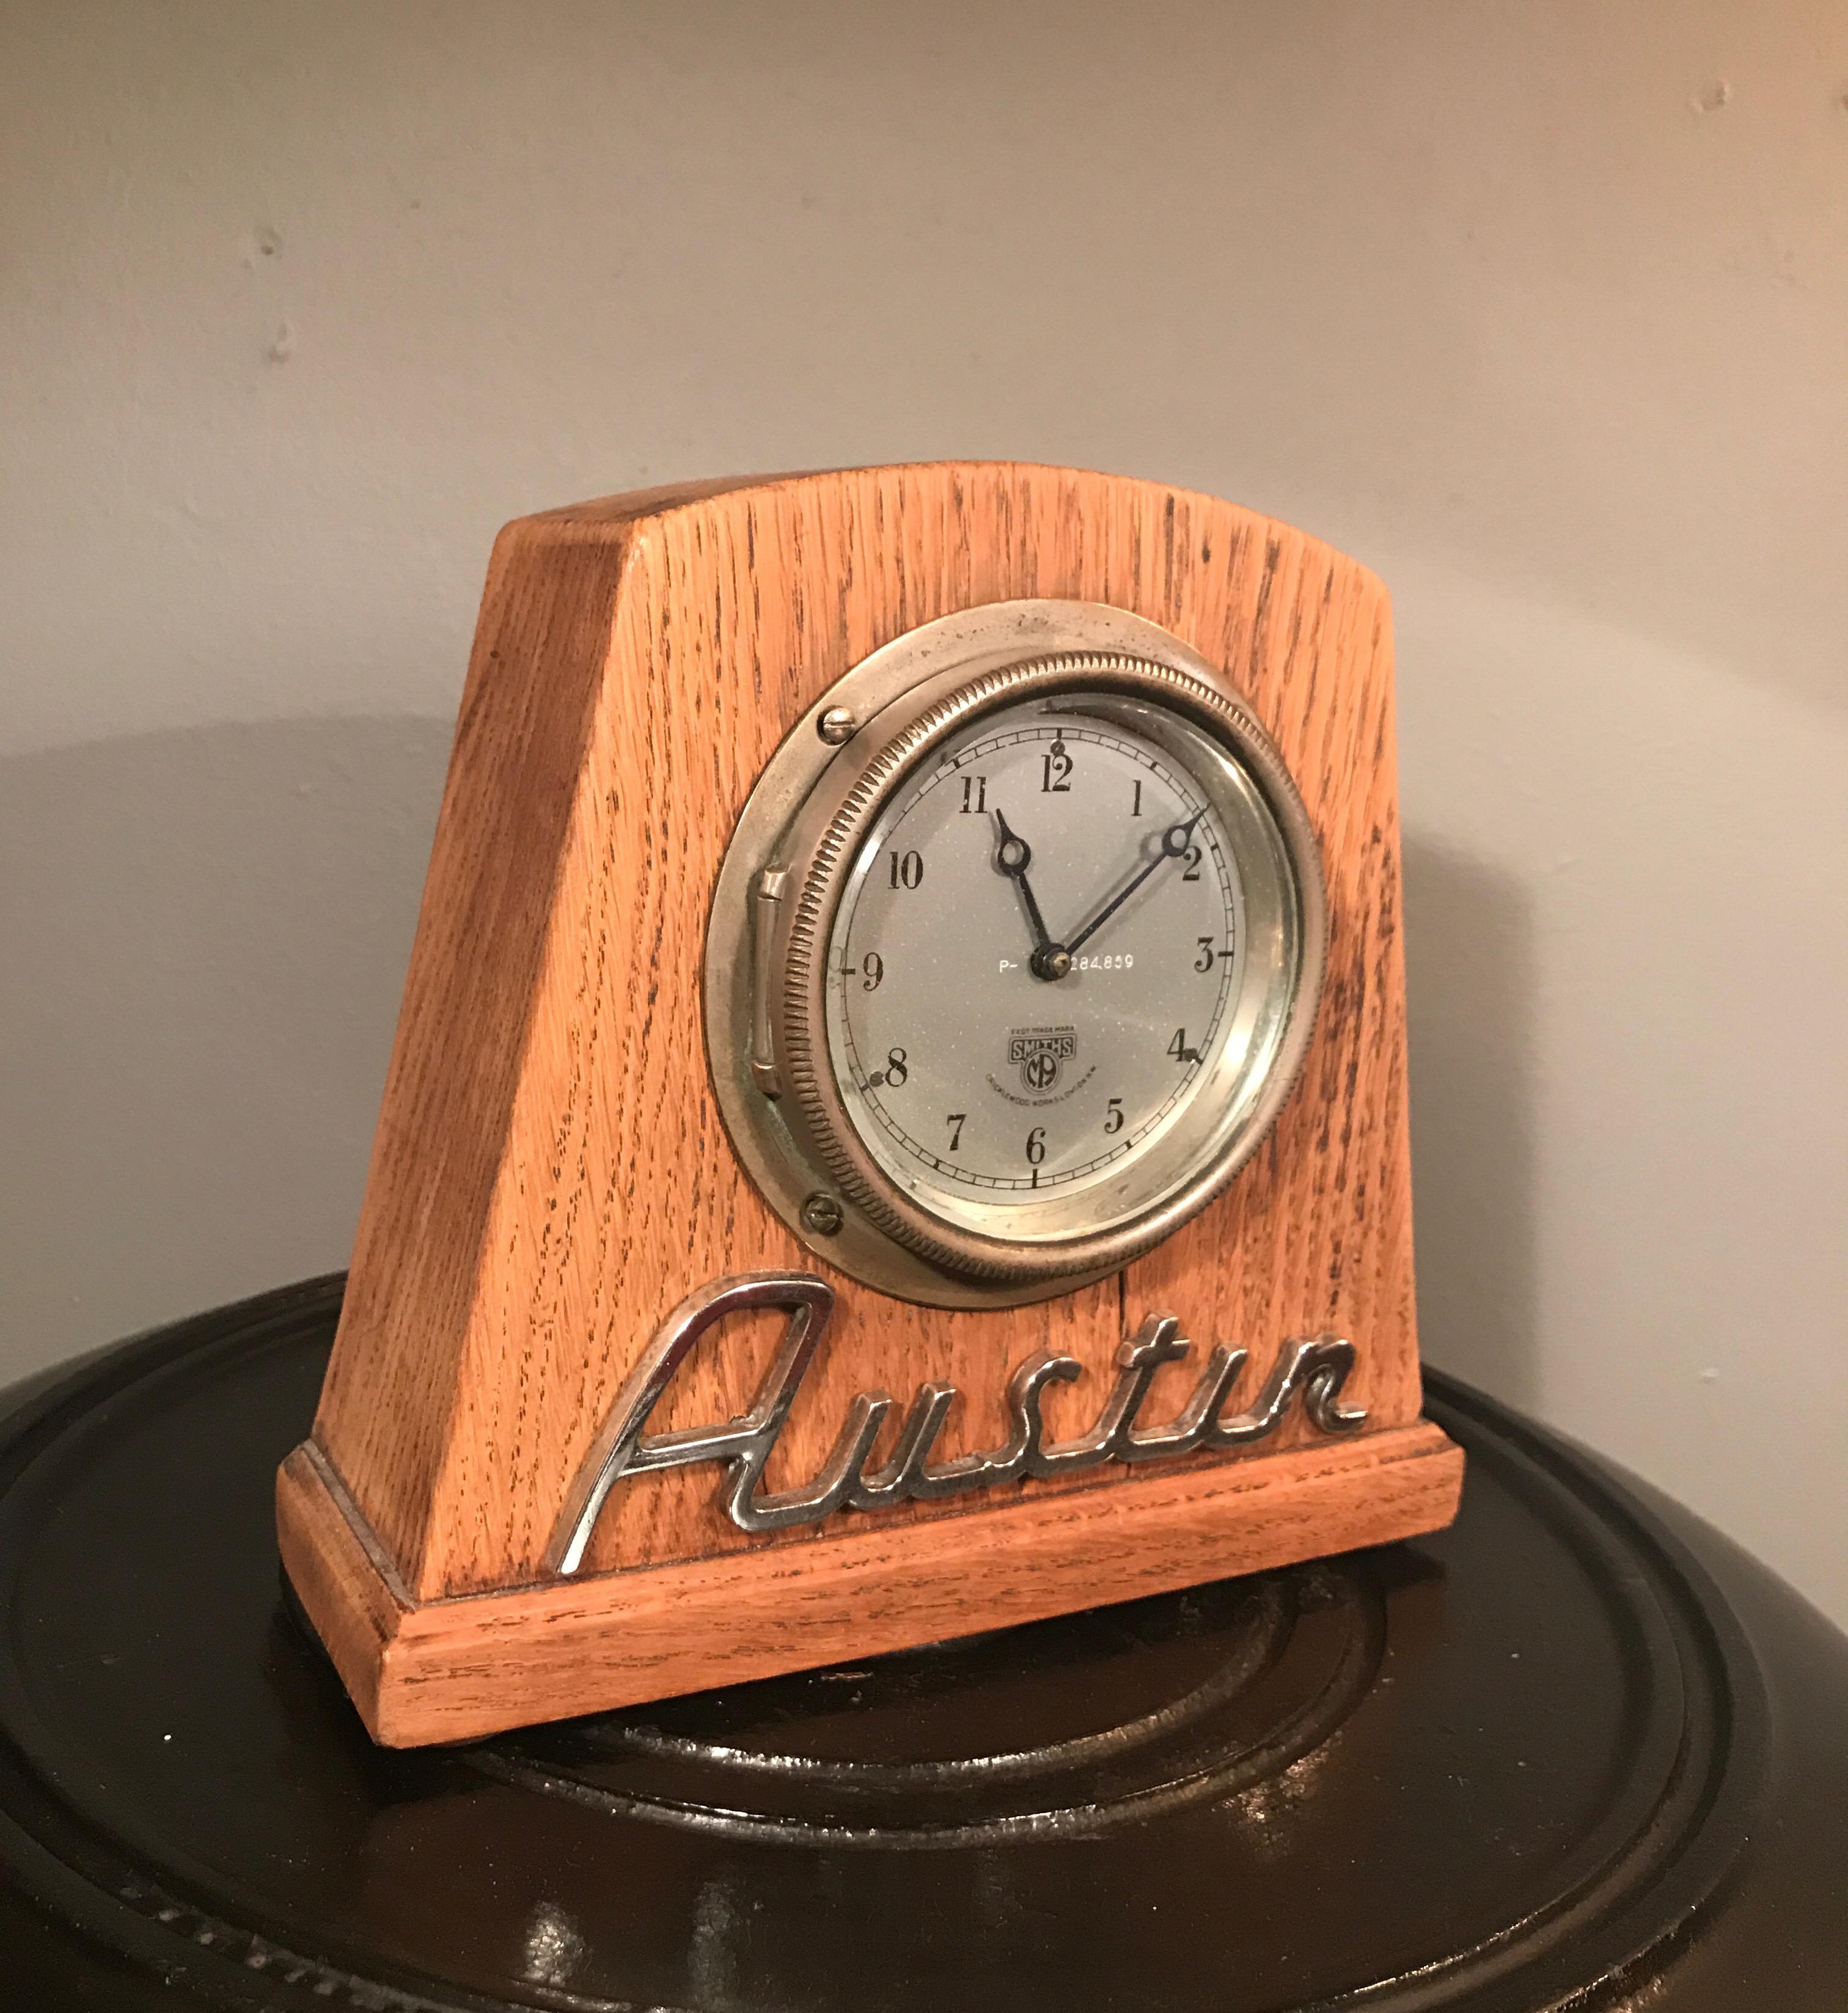 Vintage auto clock by Smiths of England from the 1930s and most probably from an Austin
In working condition and still with the original instruction label on the inside
Mounted into an oak case
Lovely piece of automobilia and ideal for the office